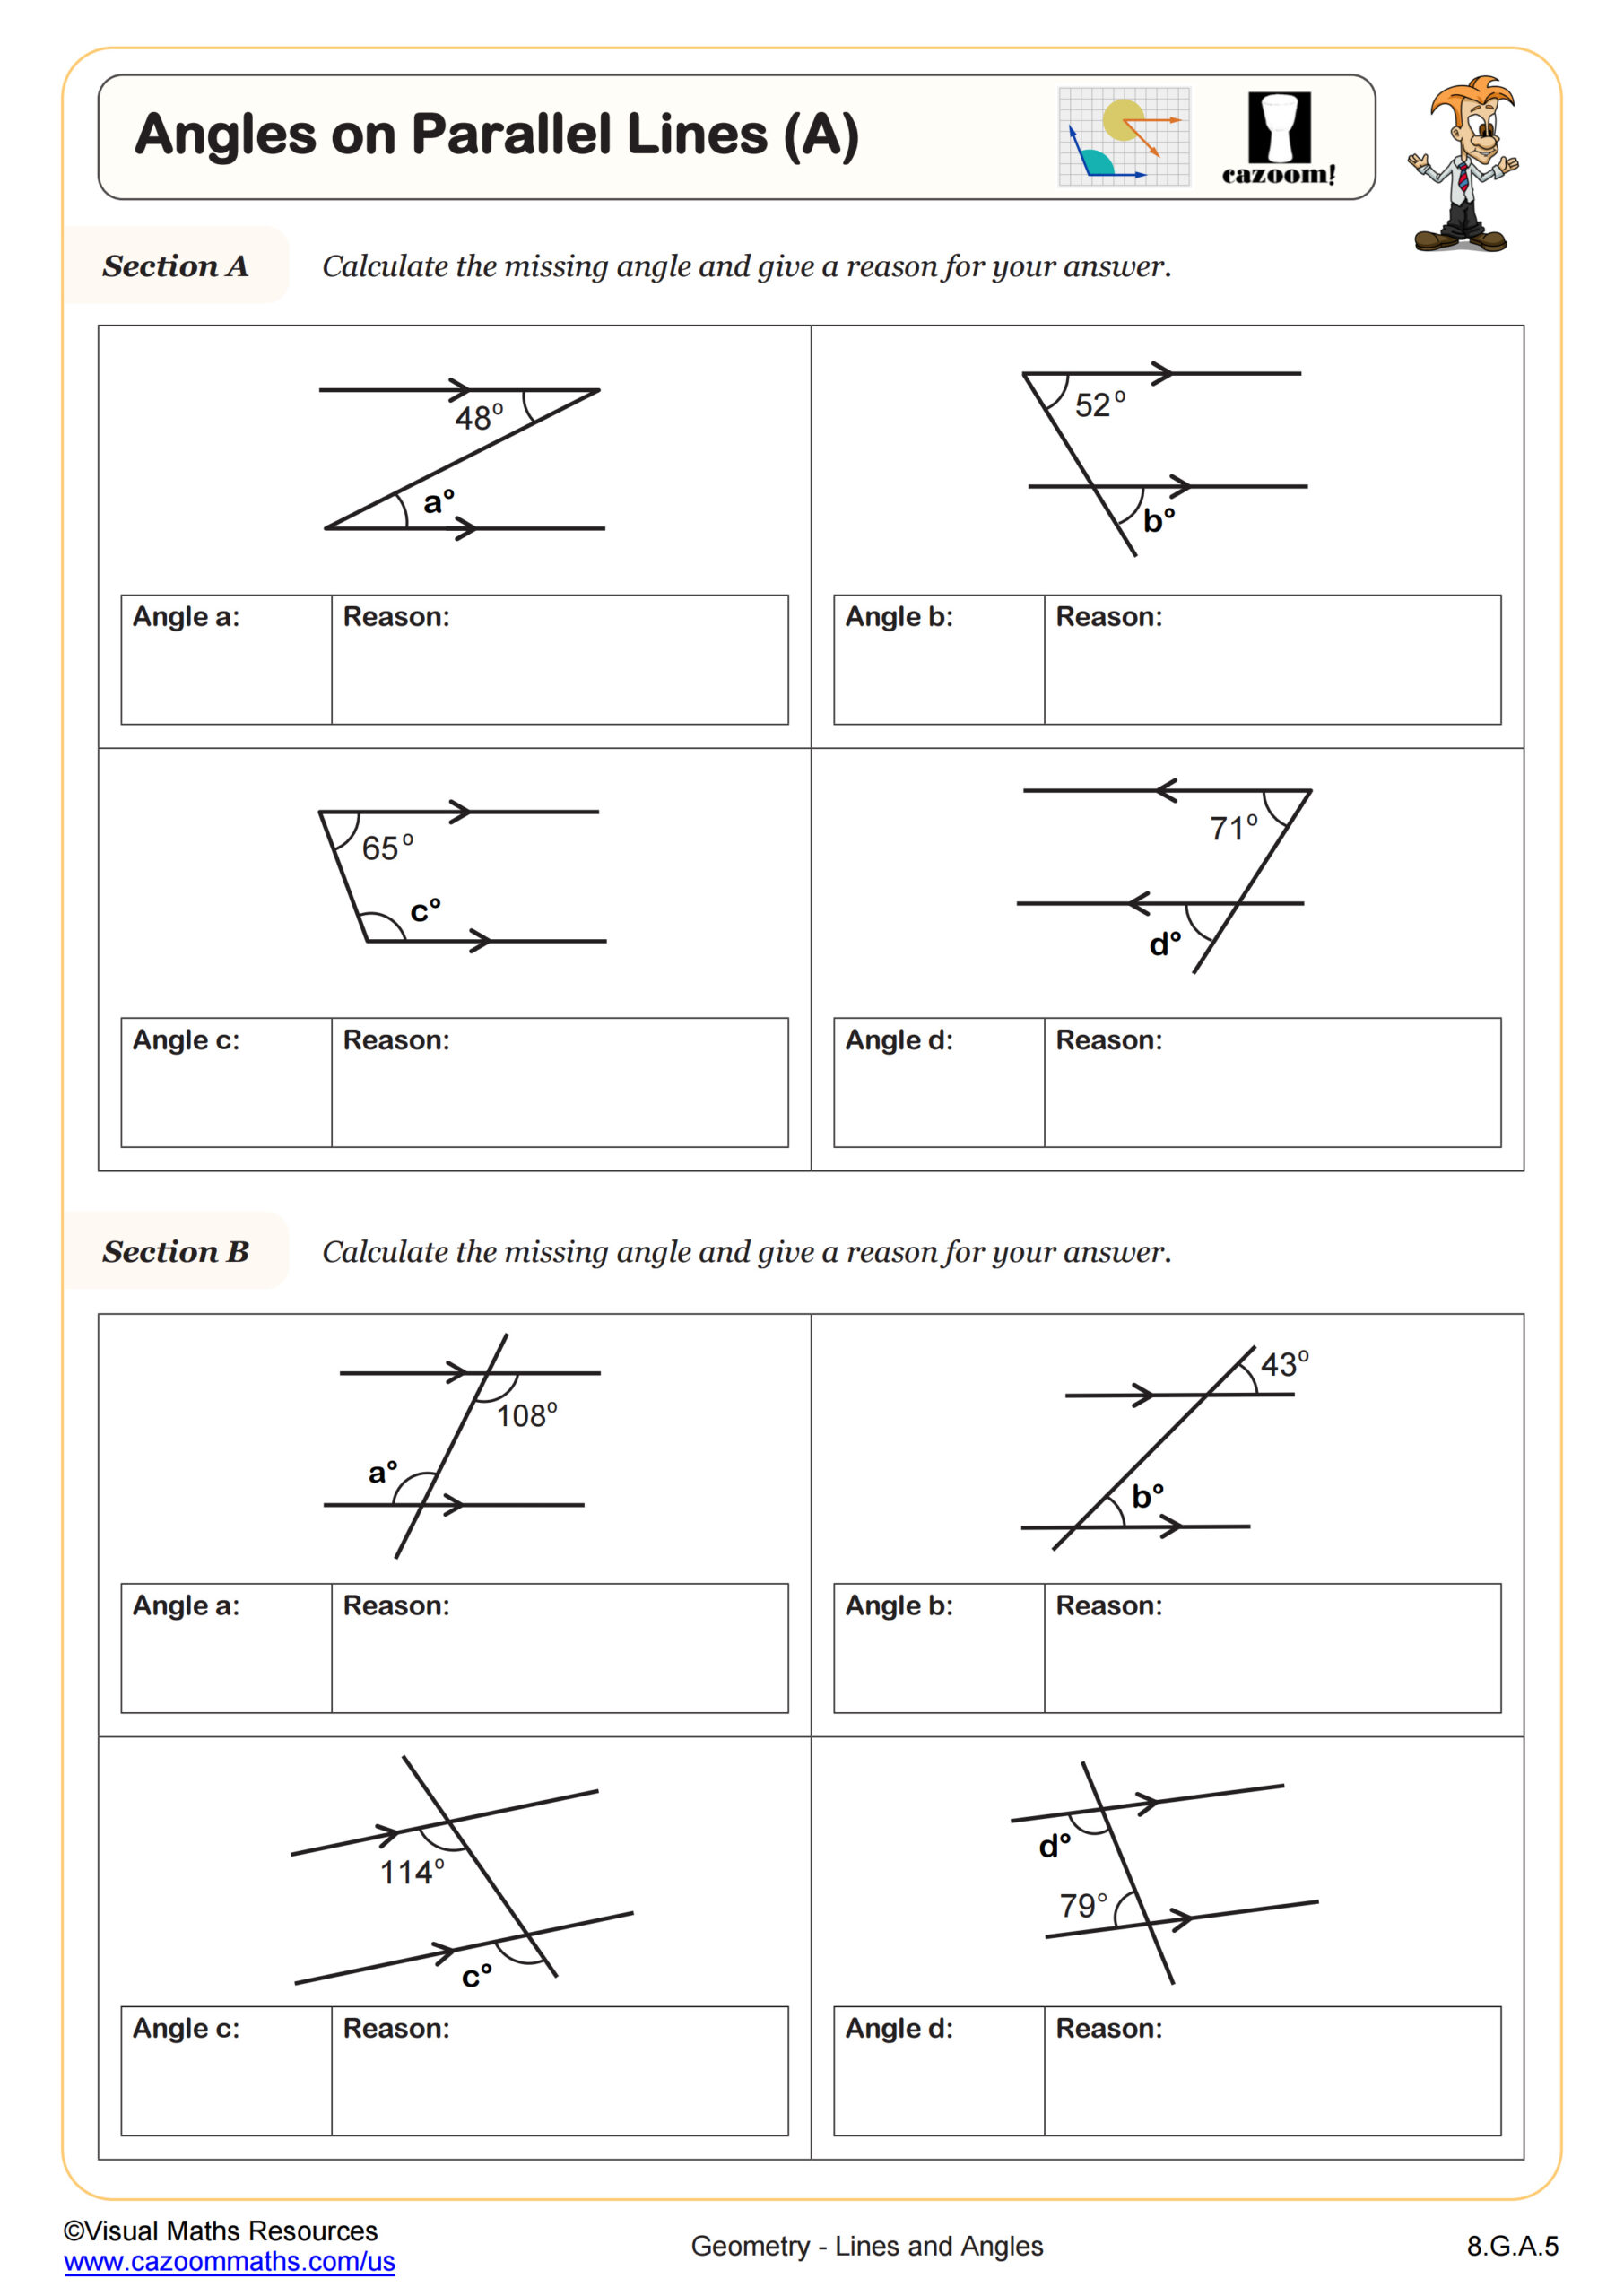 Calculating  Angles on Parallel Lines with Transversals Worksheet suitable for students in  8th Grade